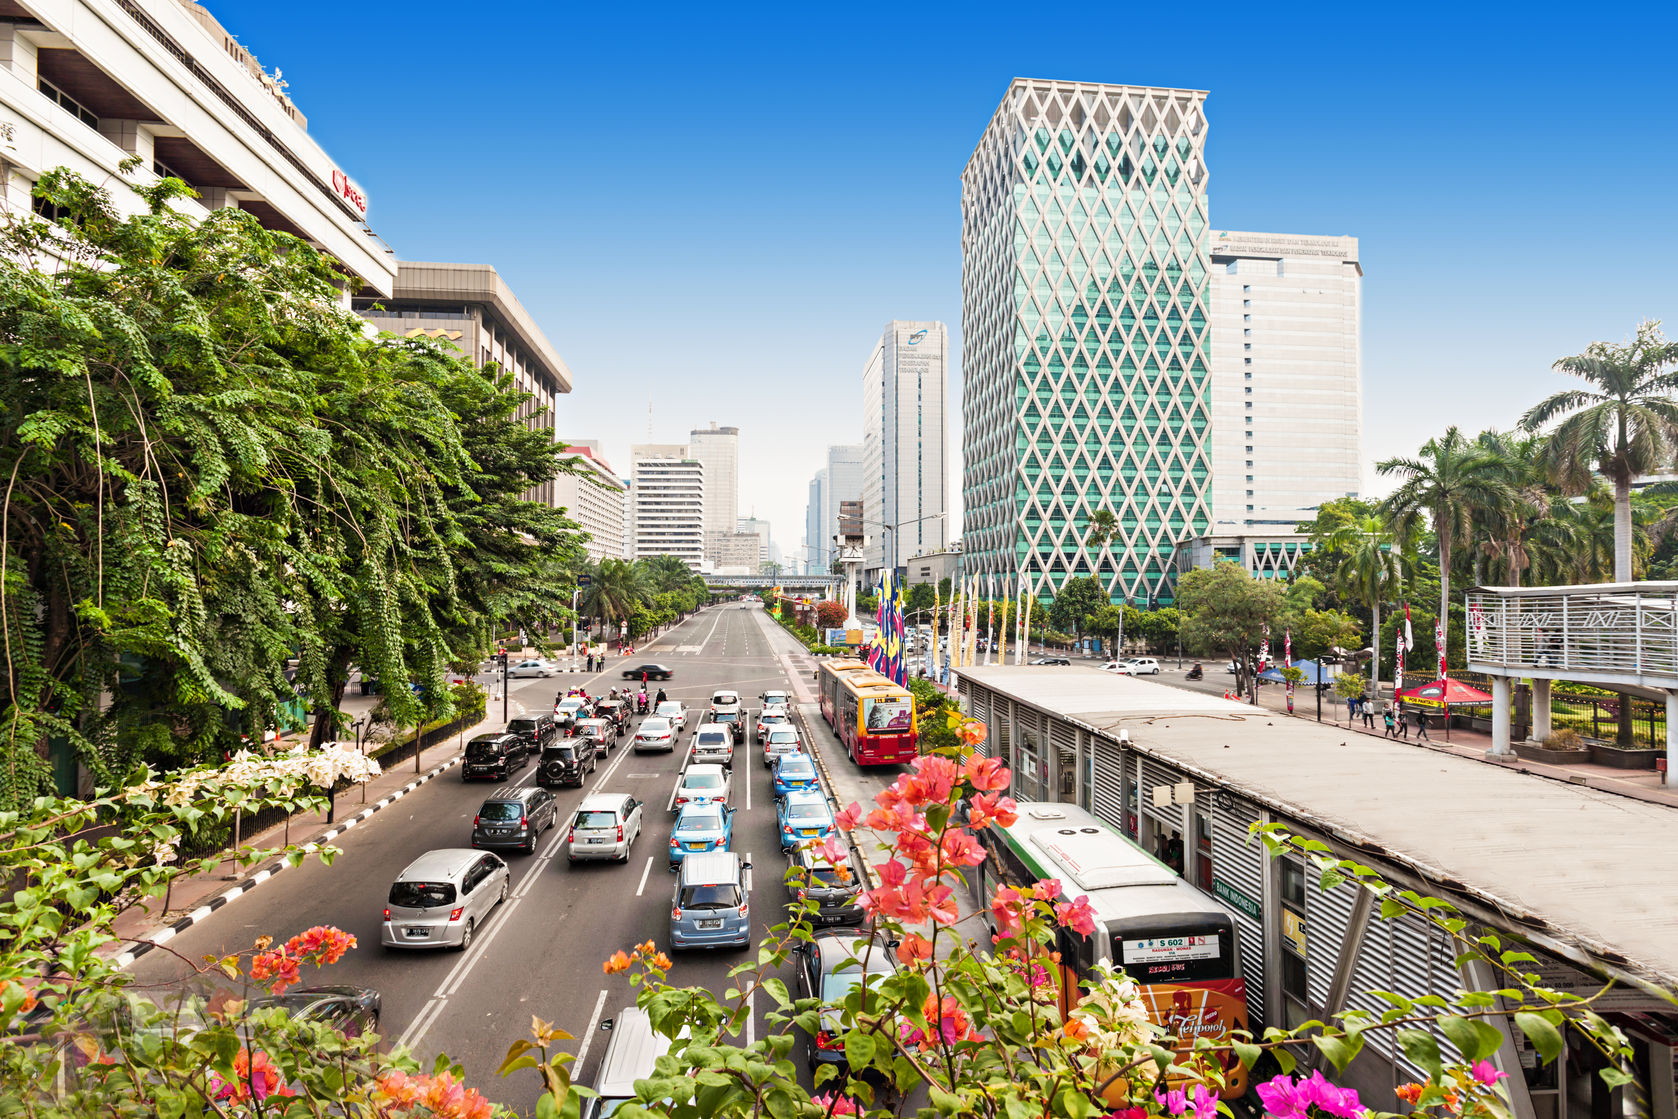 New Foreign Investment Rules In Indonesia’s Healthcare And Pharmaceutical Sectors.